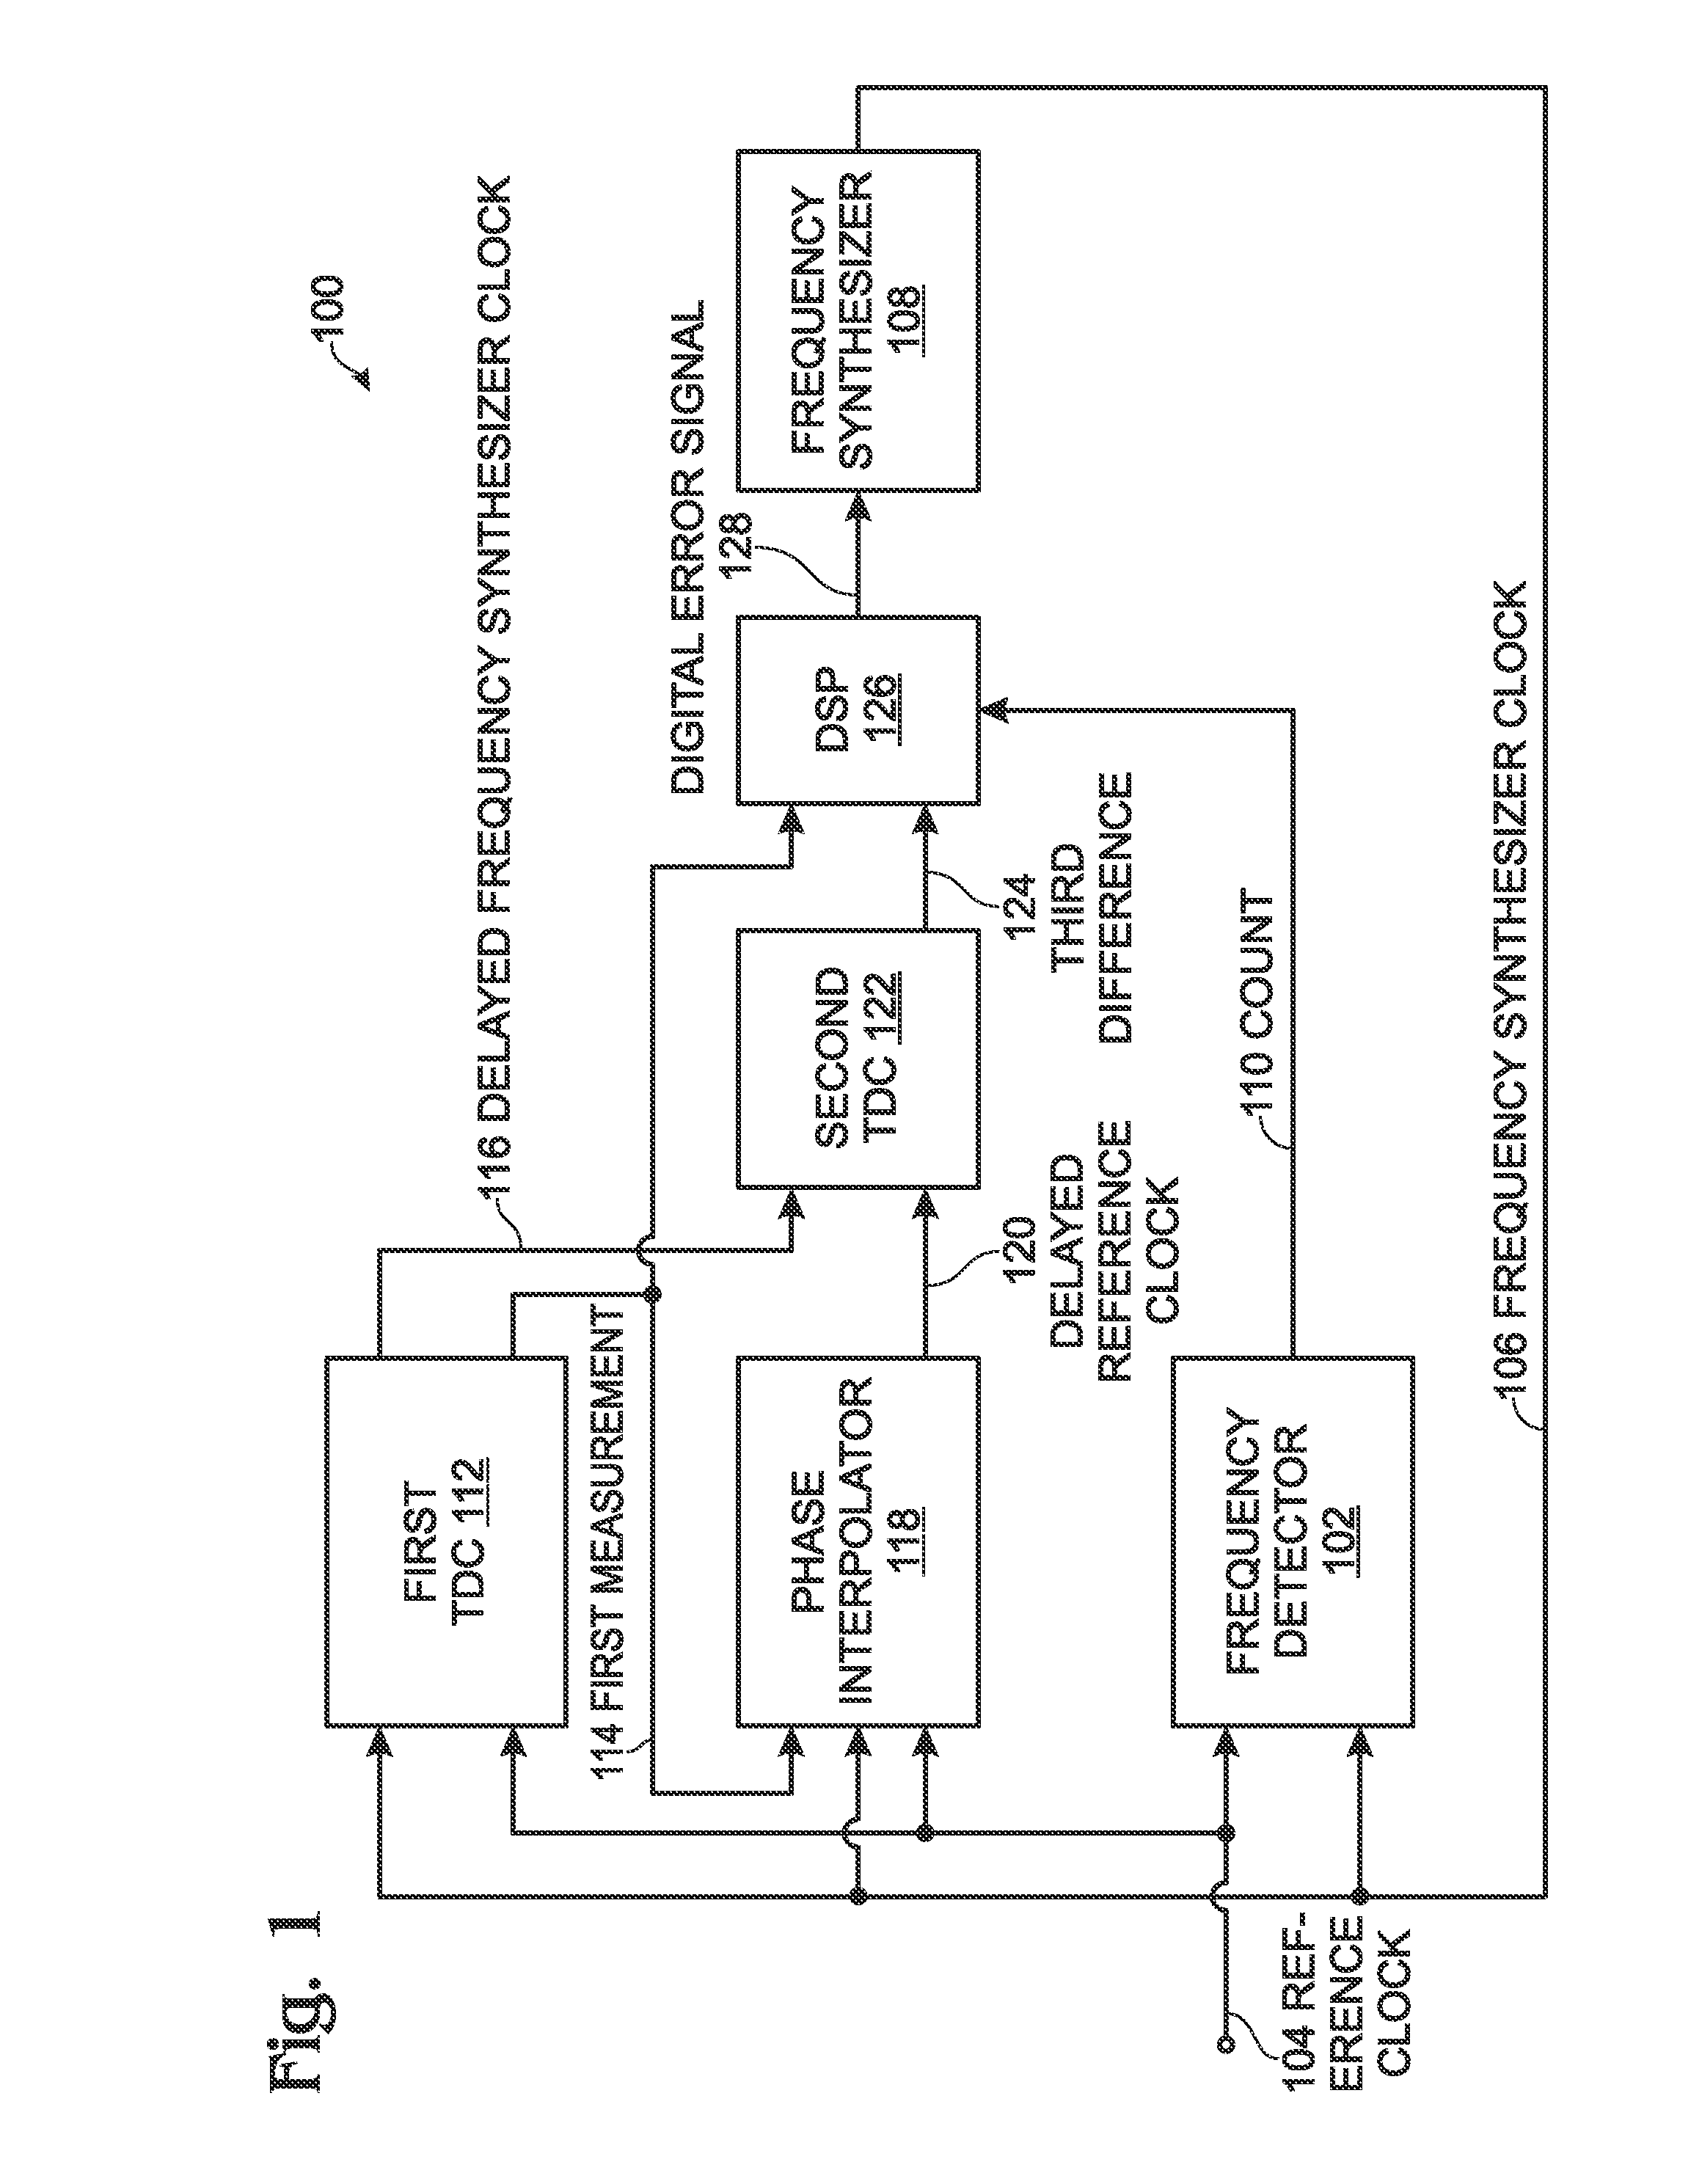 Frequency integrator with digital phase error message for phase-locked loop applications